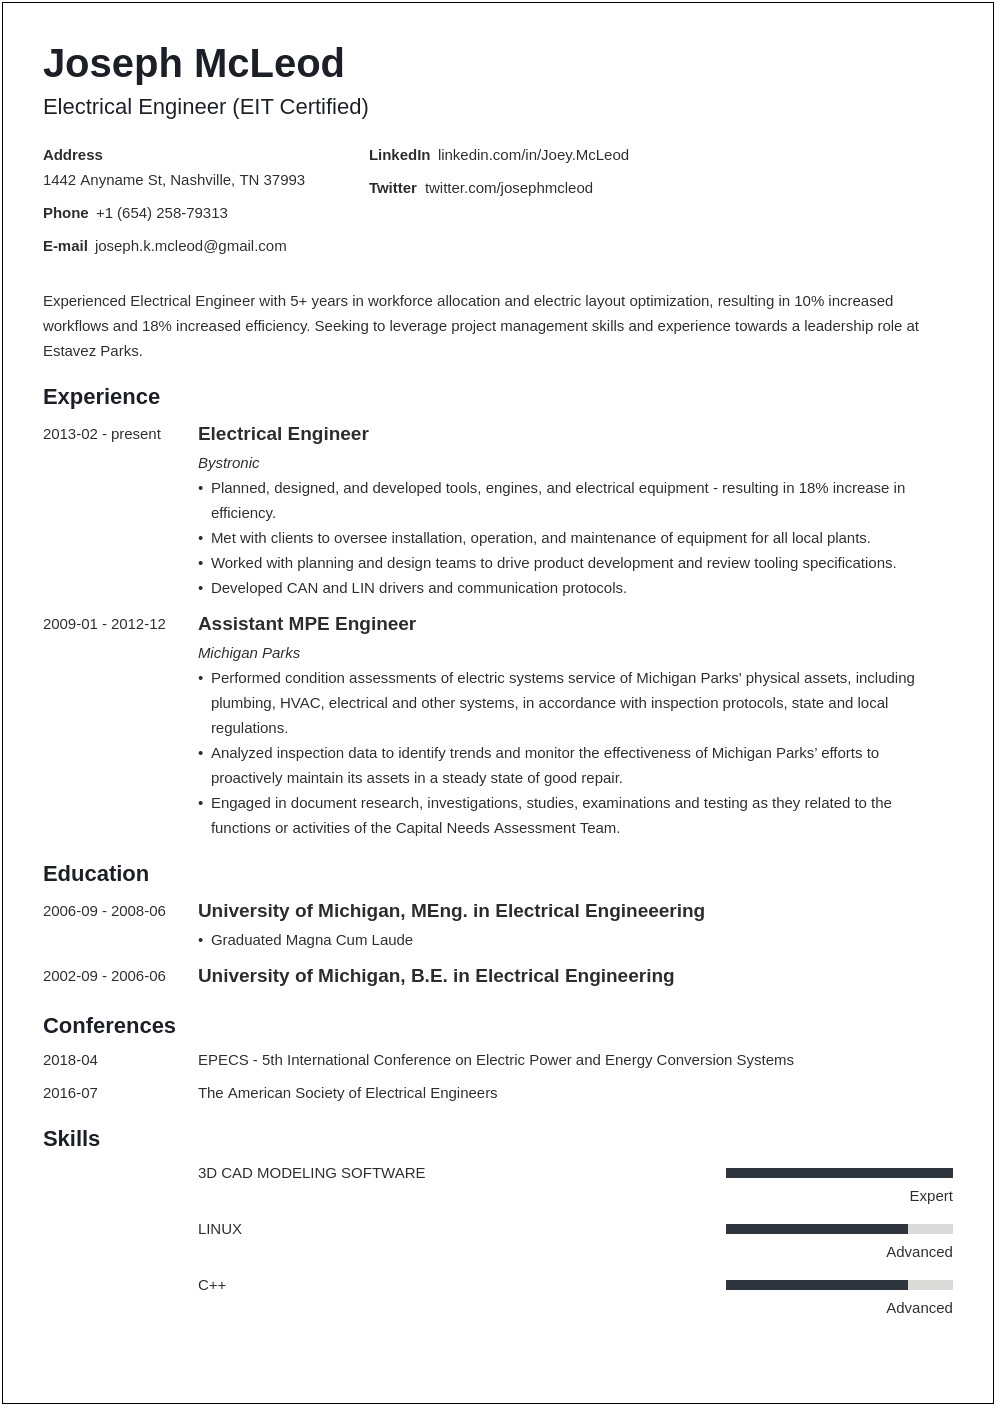 Electrical Engineer Resume Templates Free